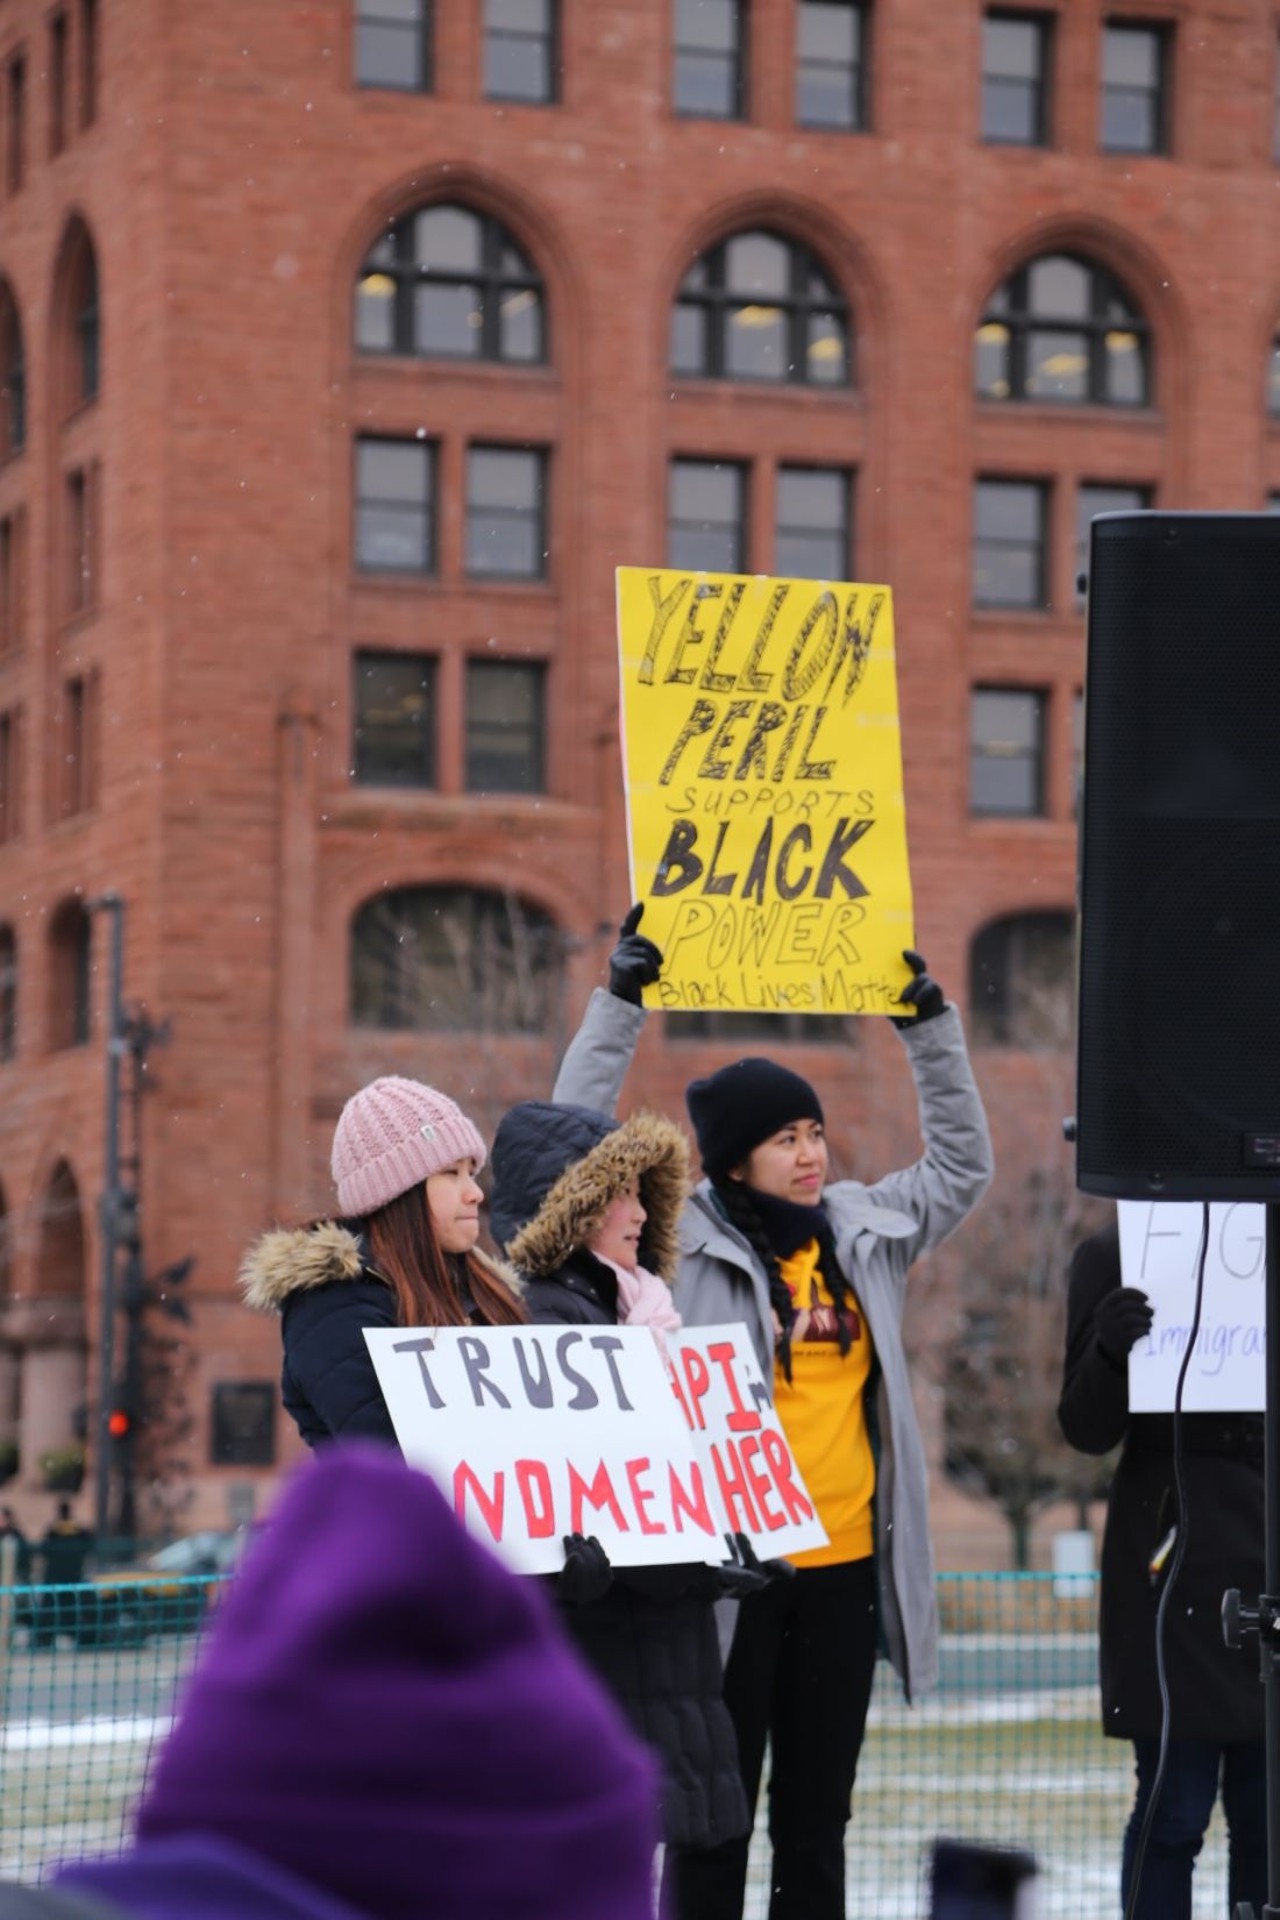 Everything We Saw at Women's March Cleveland 2019